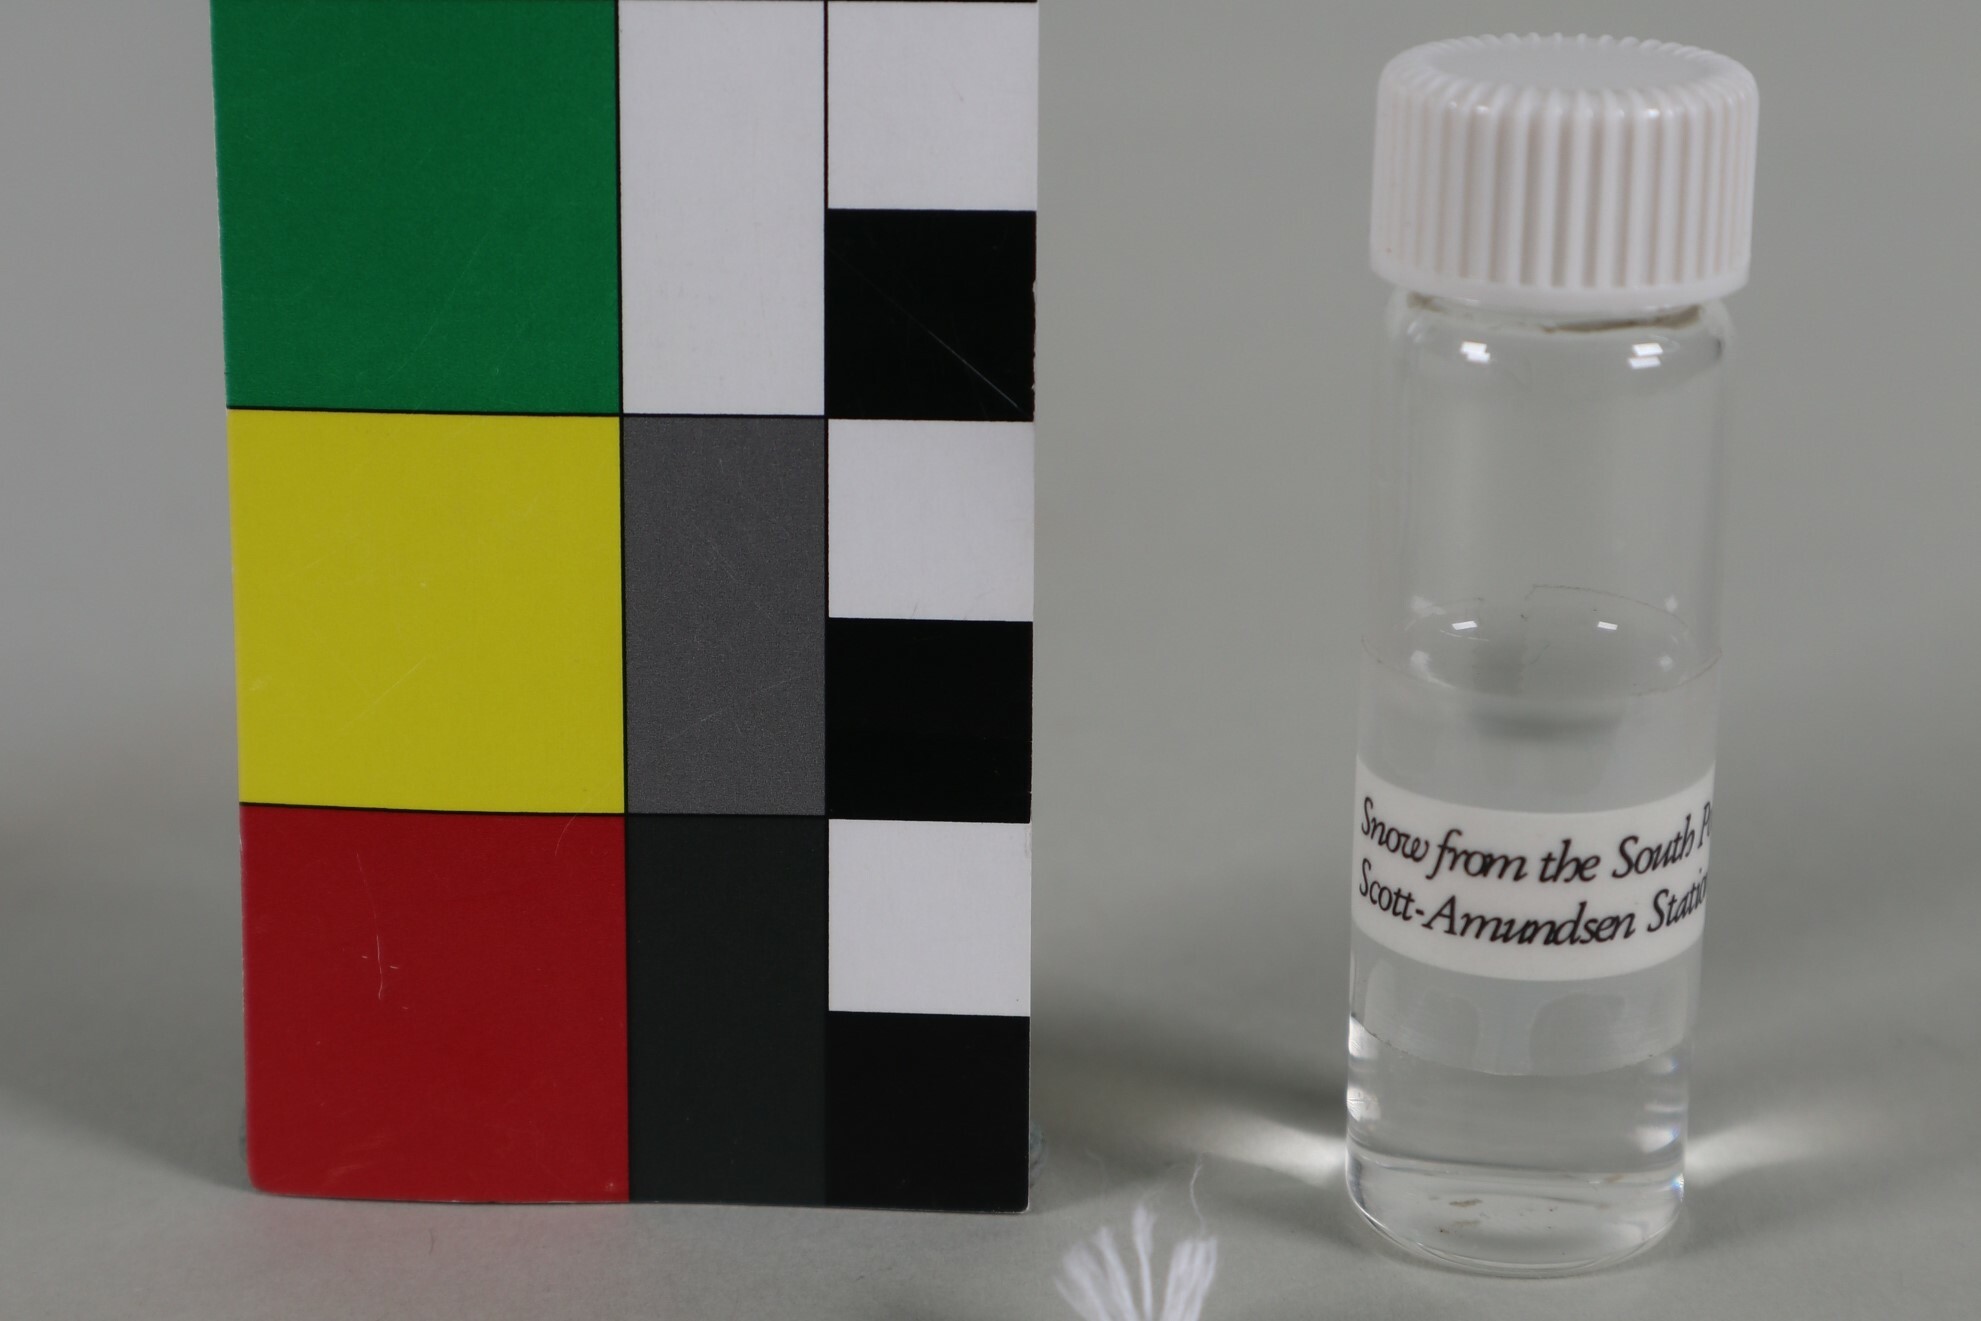 Vial of 'snow' from the South Pole. Cantebury Museum UD2019.5.292